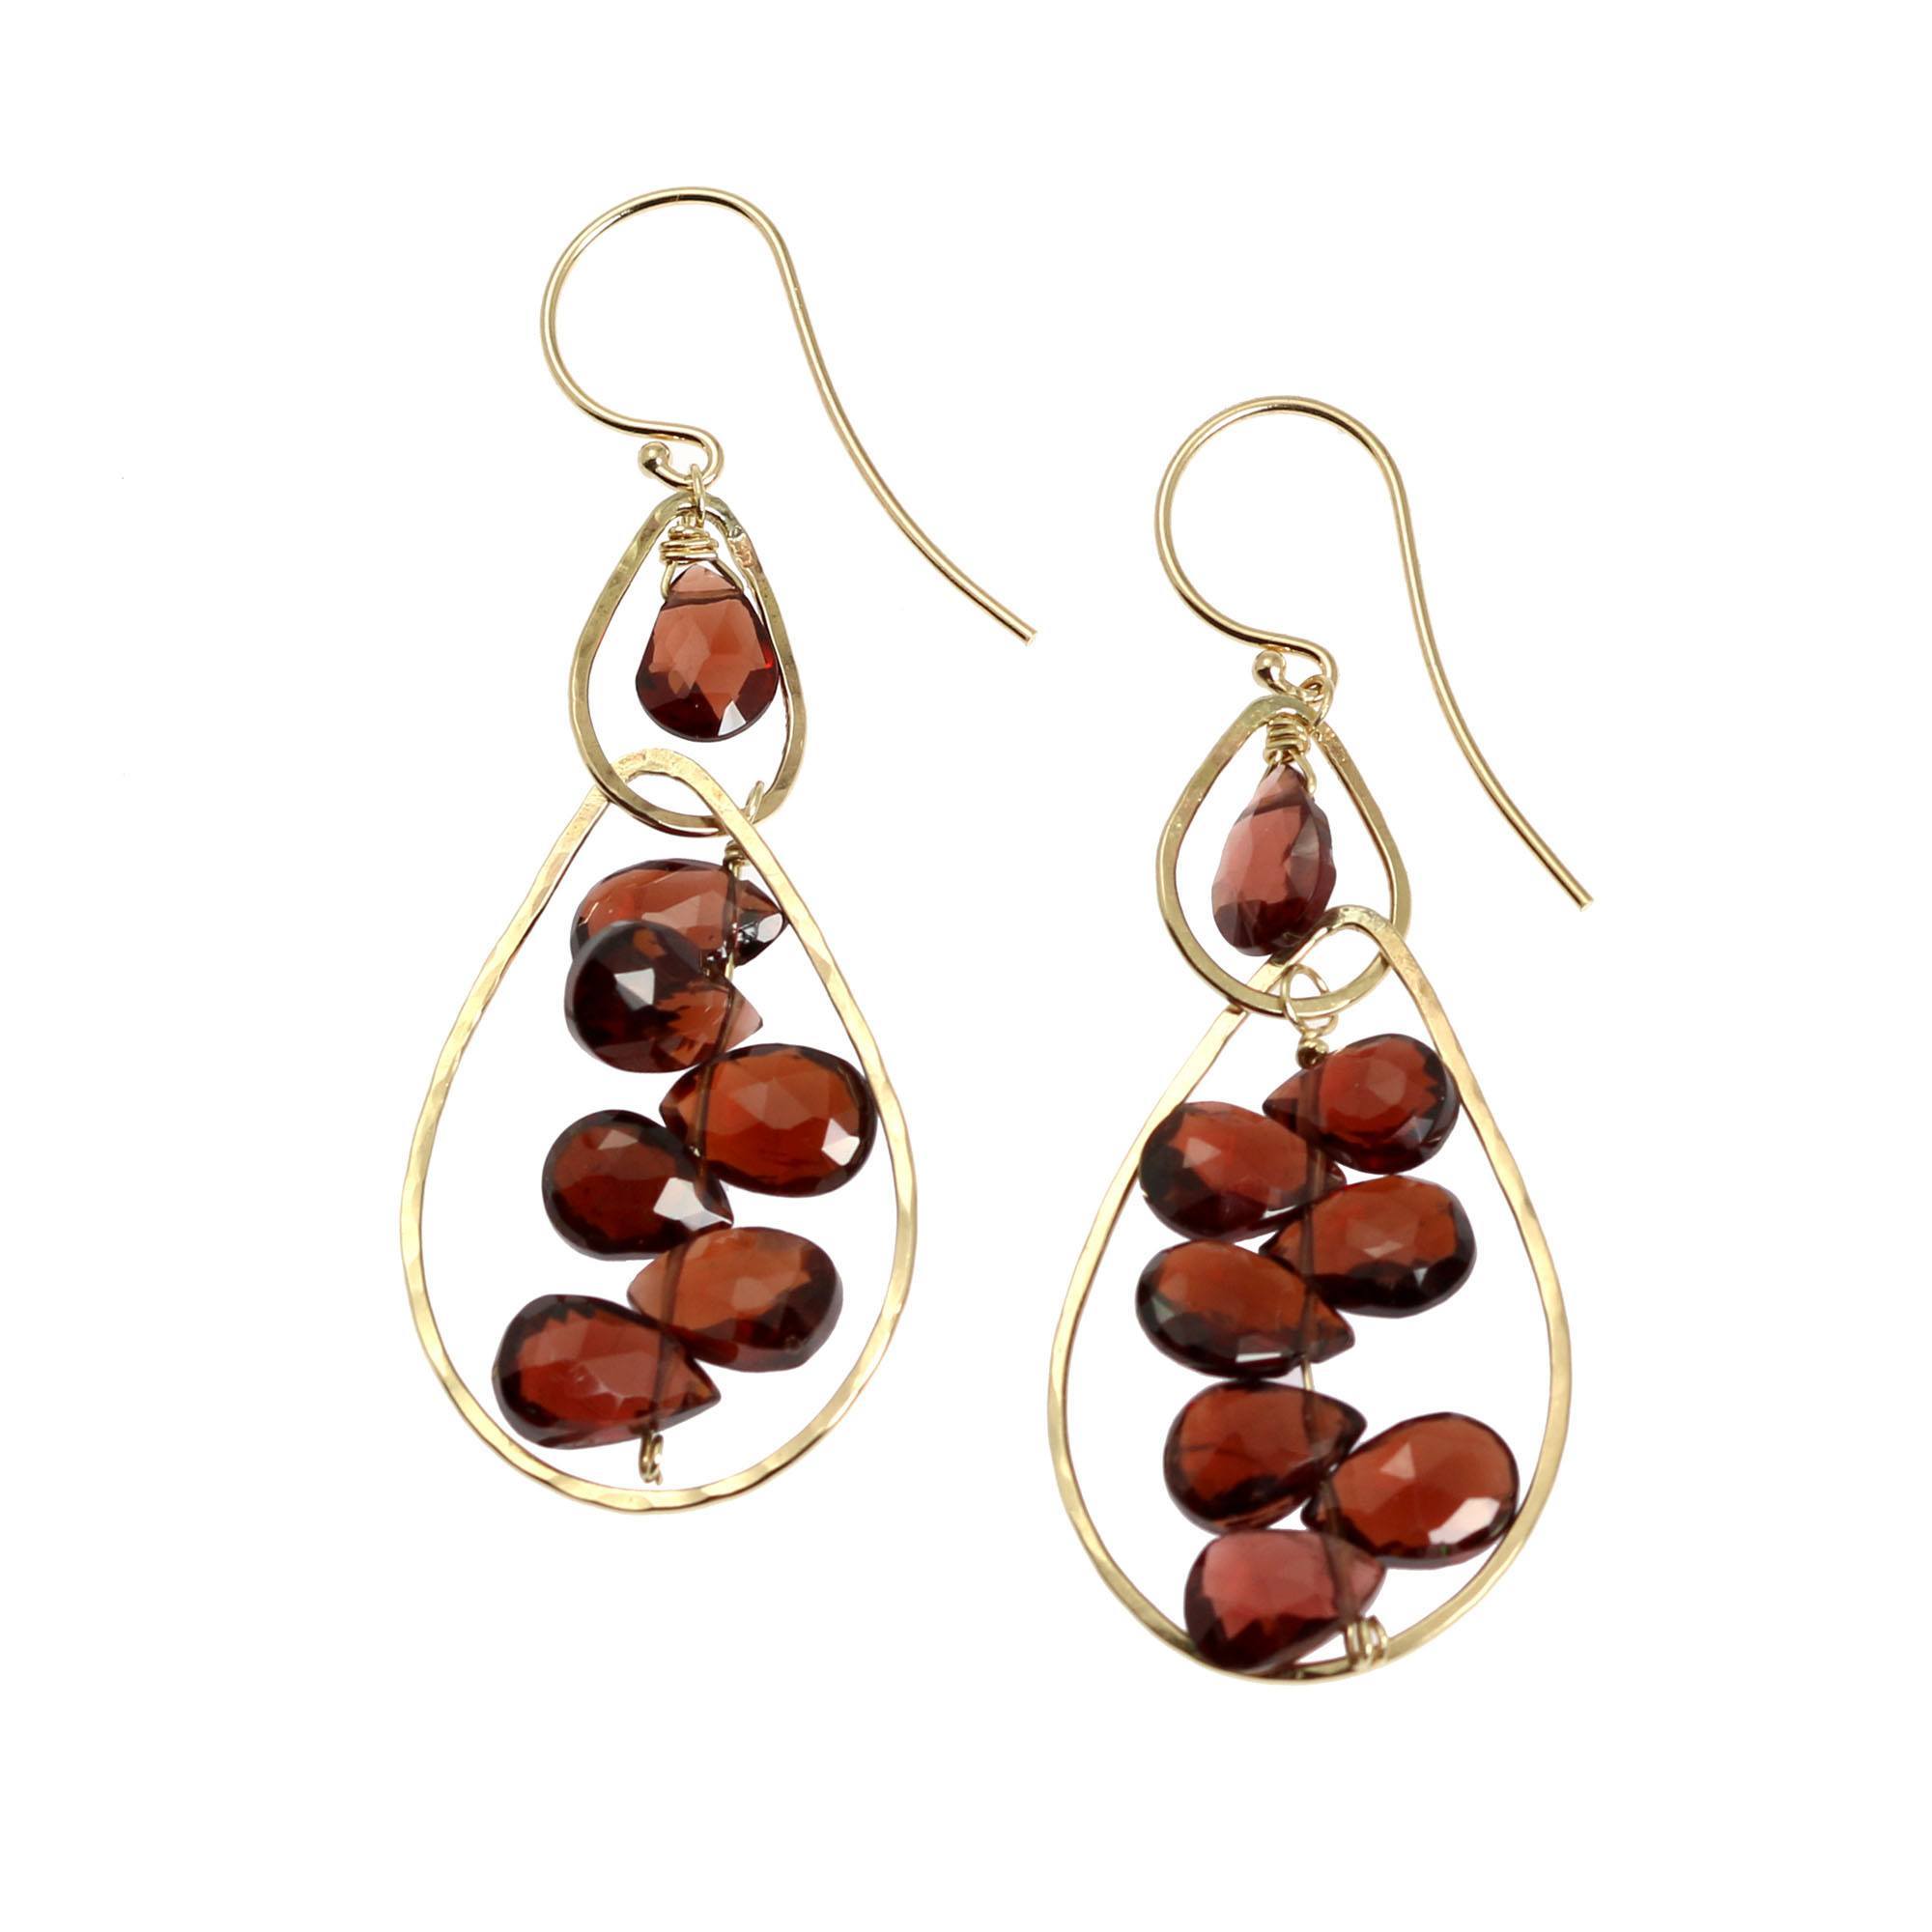 14K Gold Hammered Earrings With Garnets